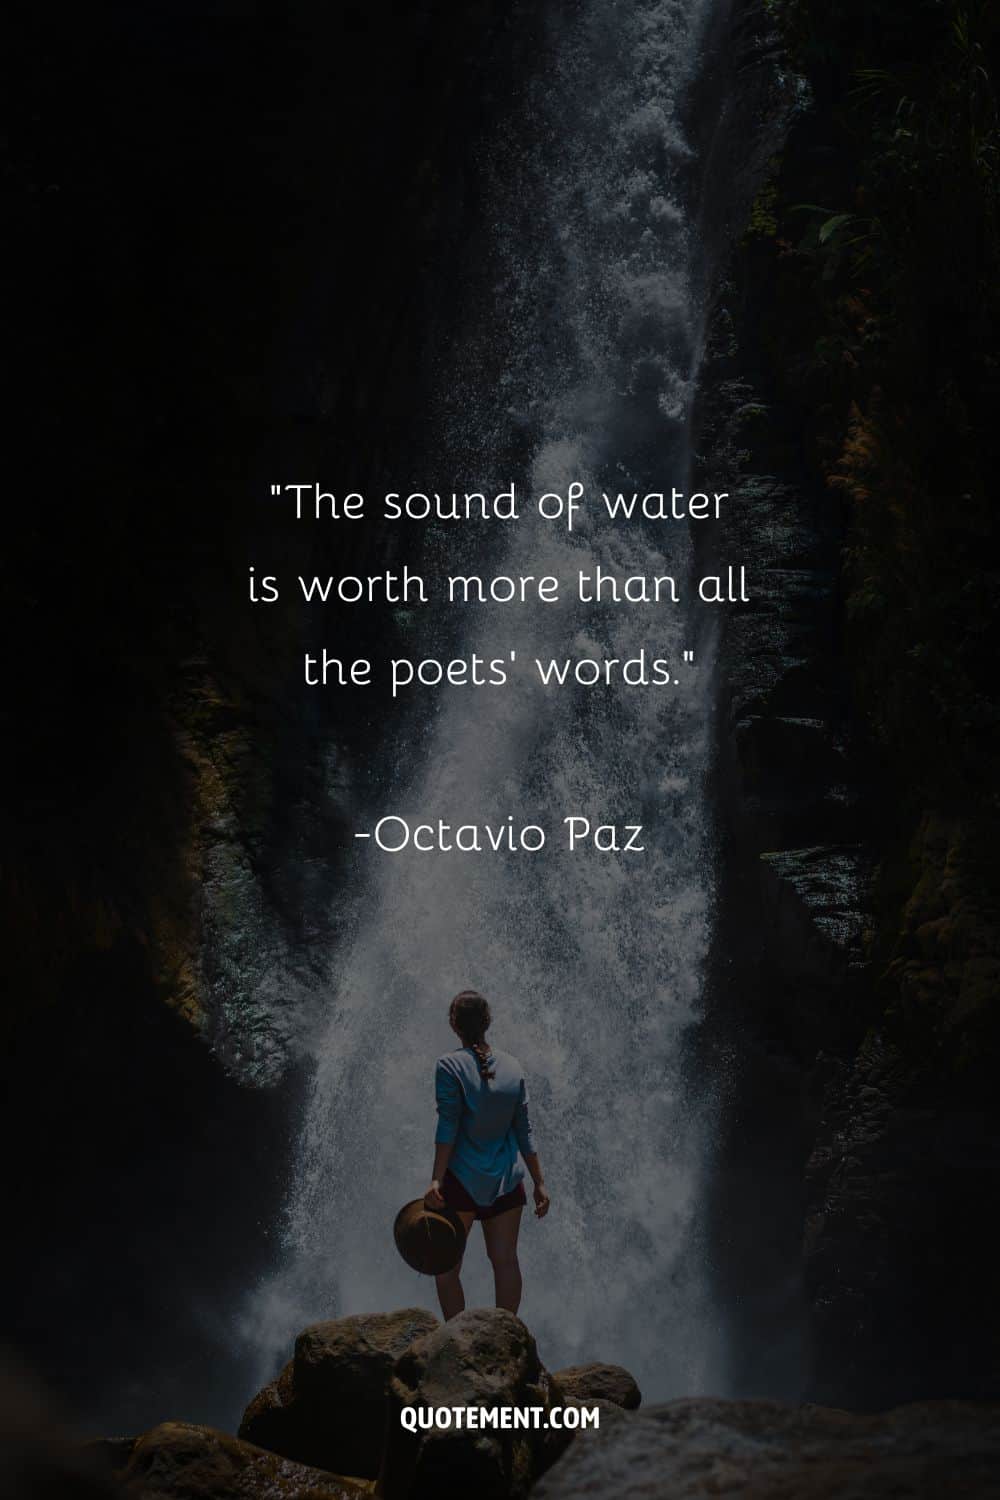 Lovely quote by Octavio Paz on the sound of water, and a woman by the waterfall in the background
